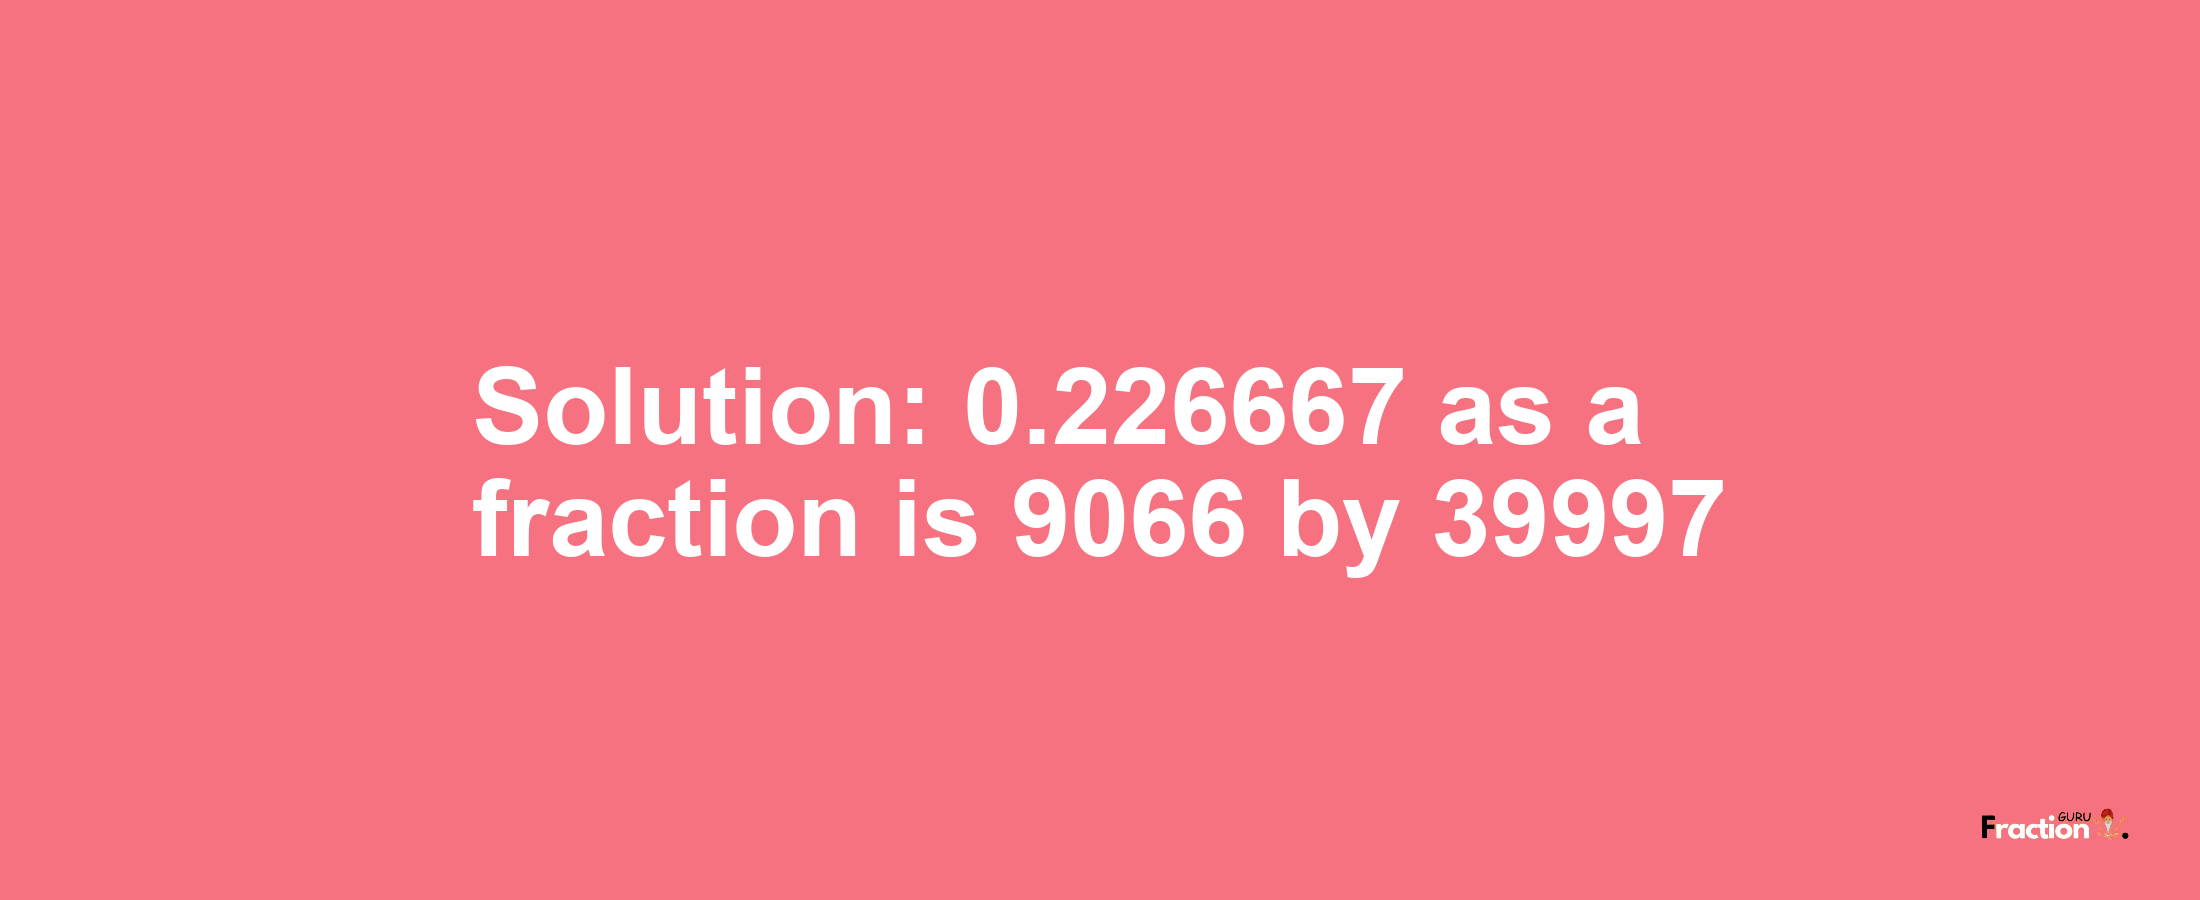 Solution:0.226667 as a fraction is 9066/39997